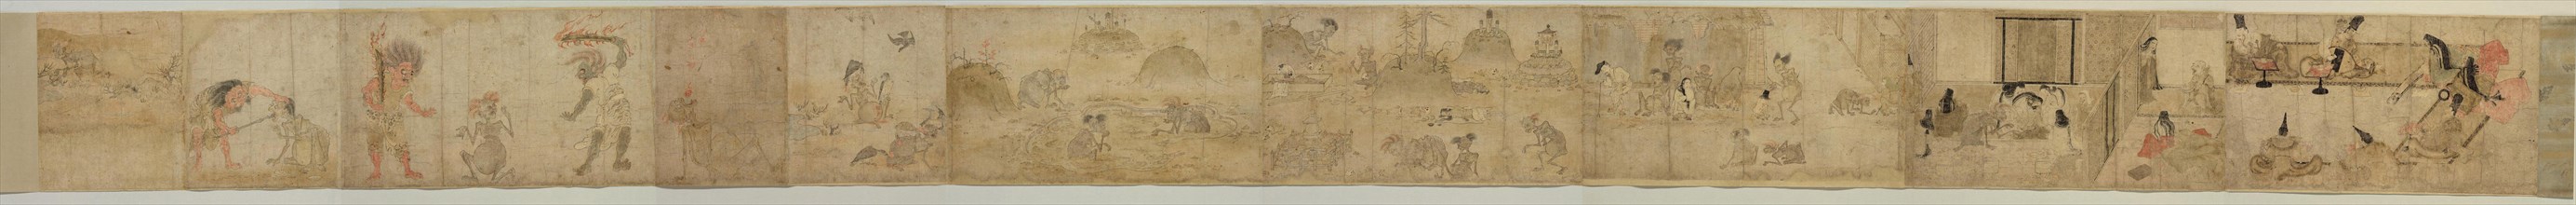 Hungry Ghosts Scroll, 12th century. Artist: Anonymous